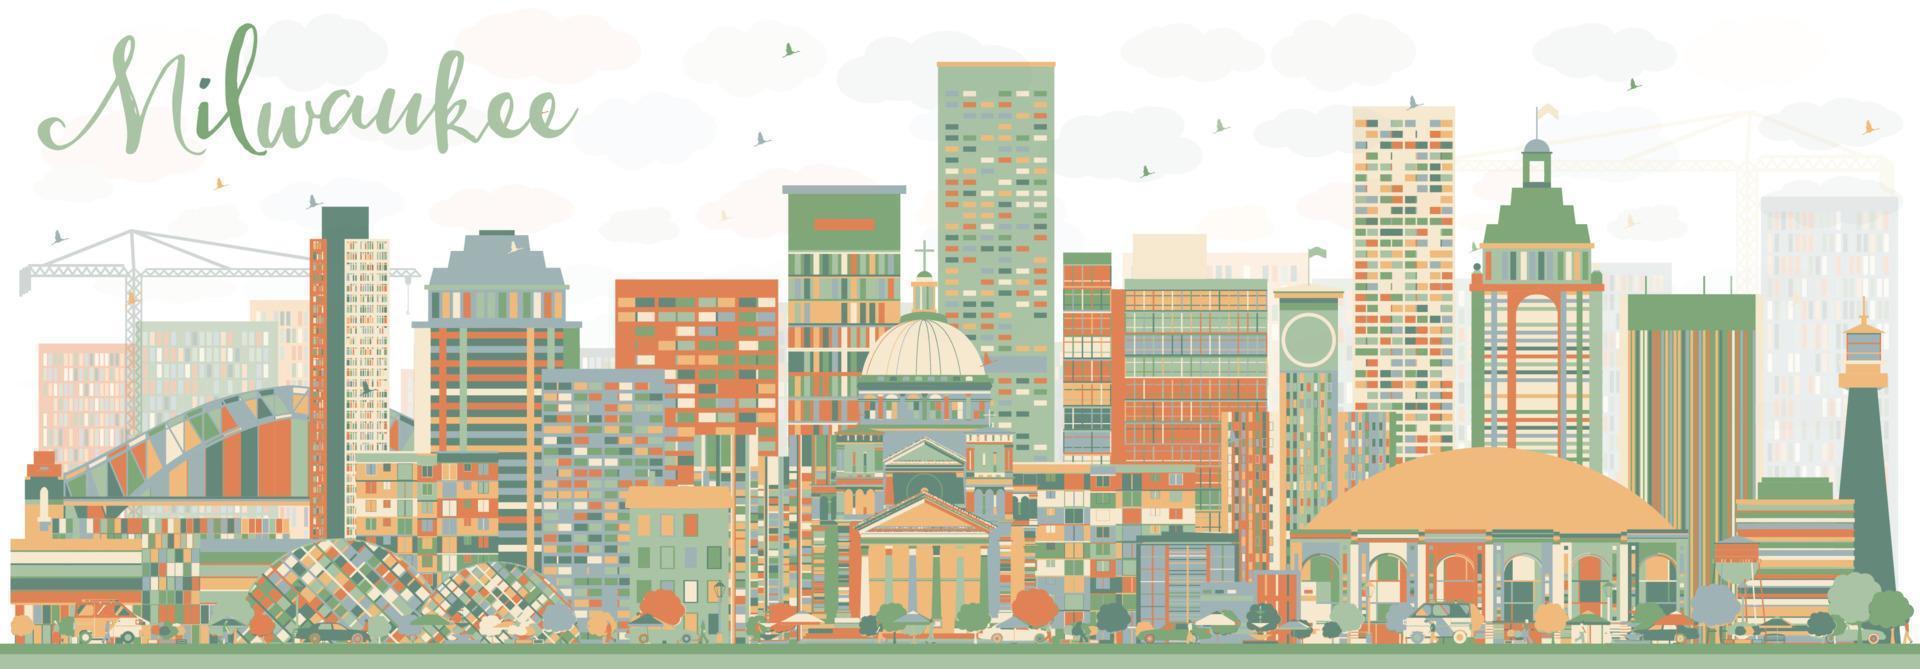 Abstract Milwaukee Skyline with Color Buildings. vector